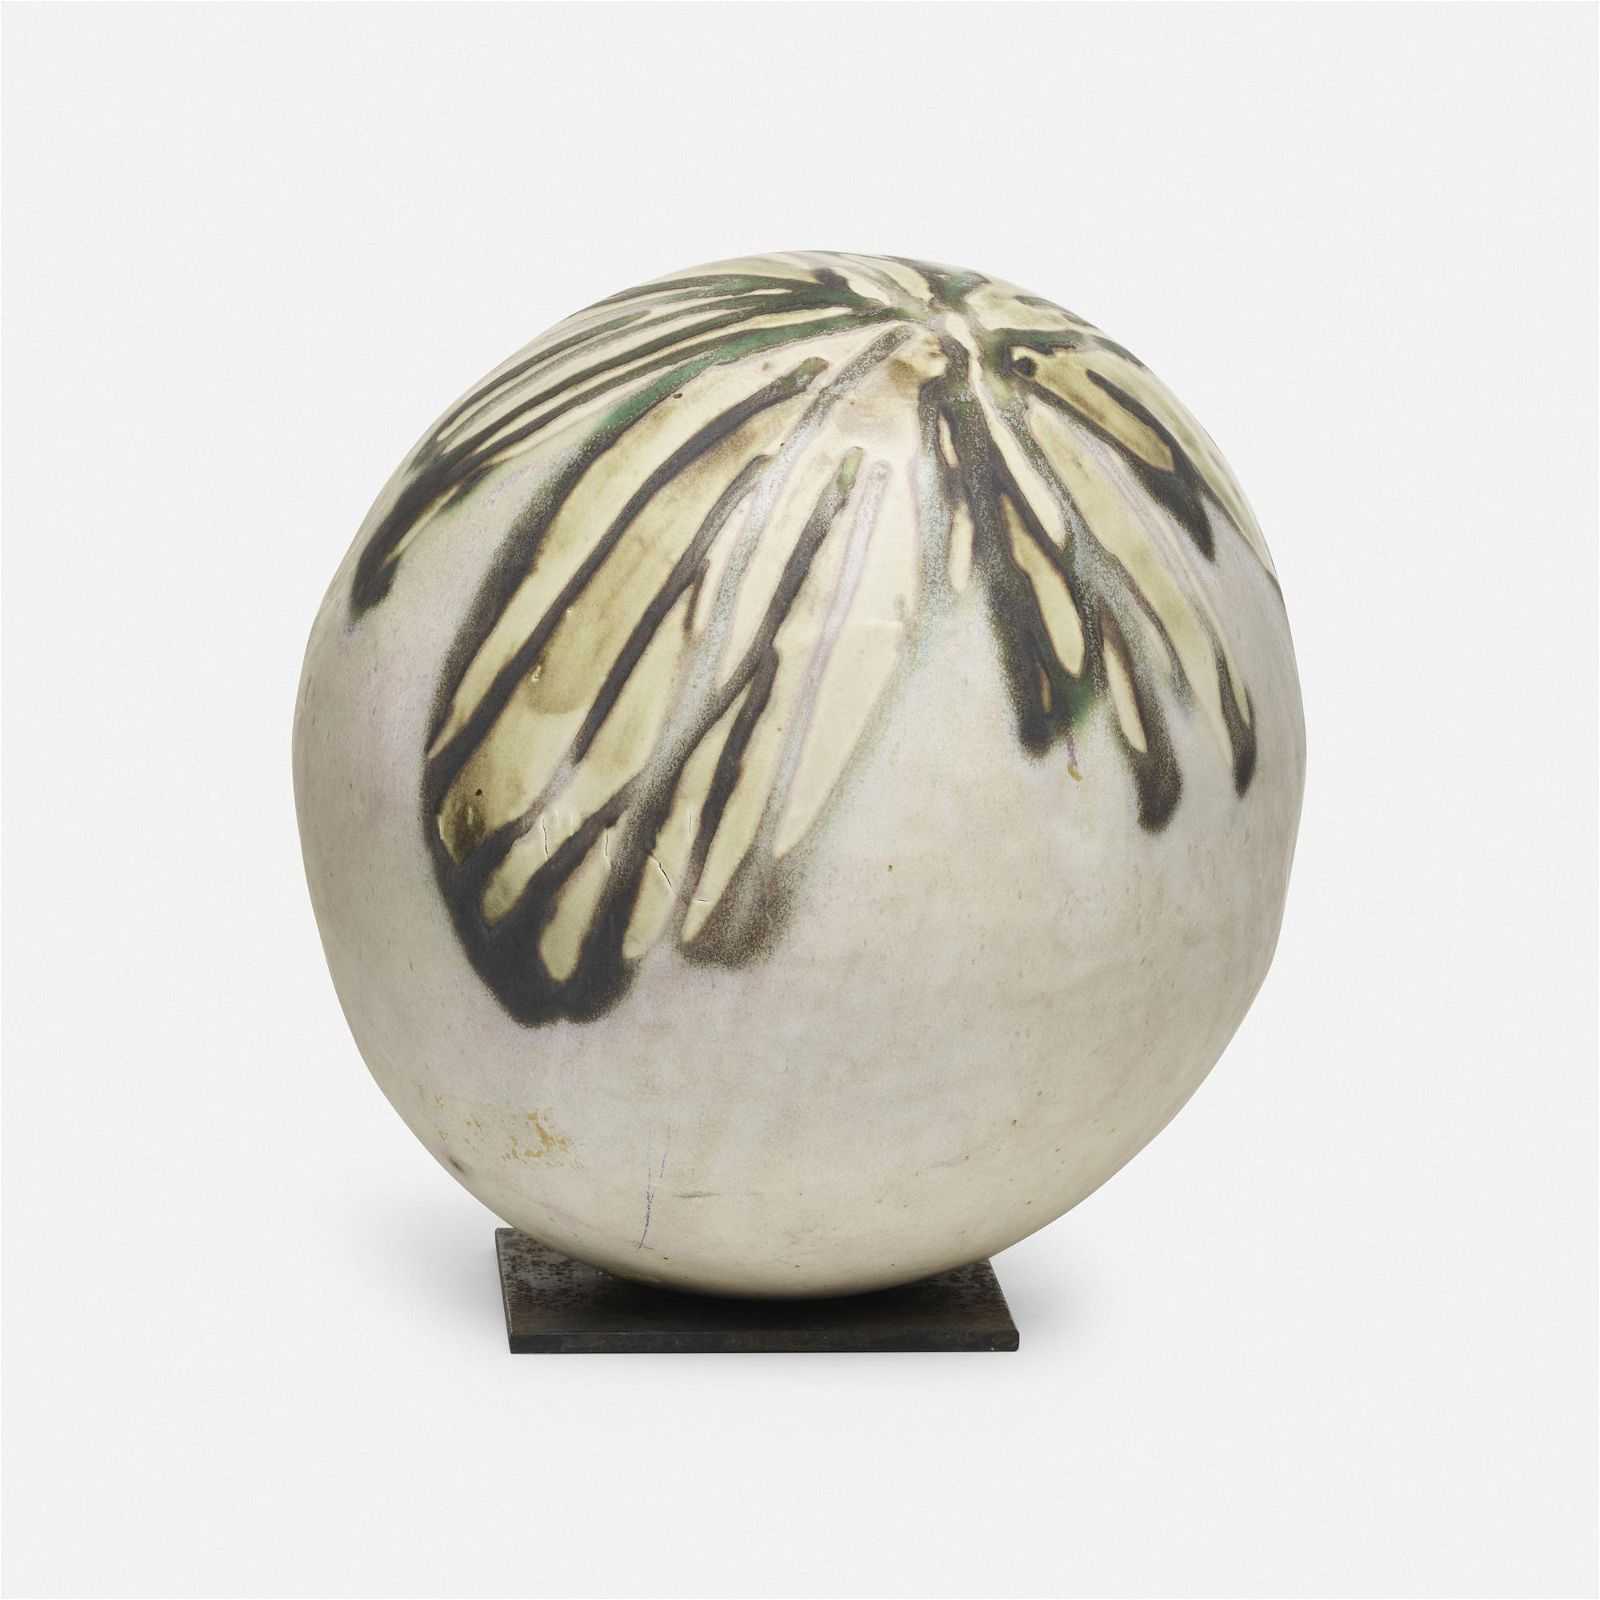 This ‘Full Moon’ vessel by Toshiko Takaezu is notable for the leaf-like fine glazing design at the top. The circa-1970 sculpture took $15,000 plus the buyer’s premium in October 2021. Image courtesy of Los Angeles Modern Auctions (LAMA) and LiveAuctioneers.